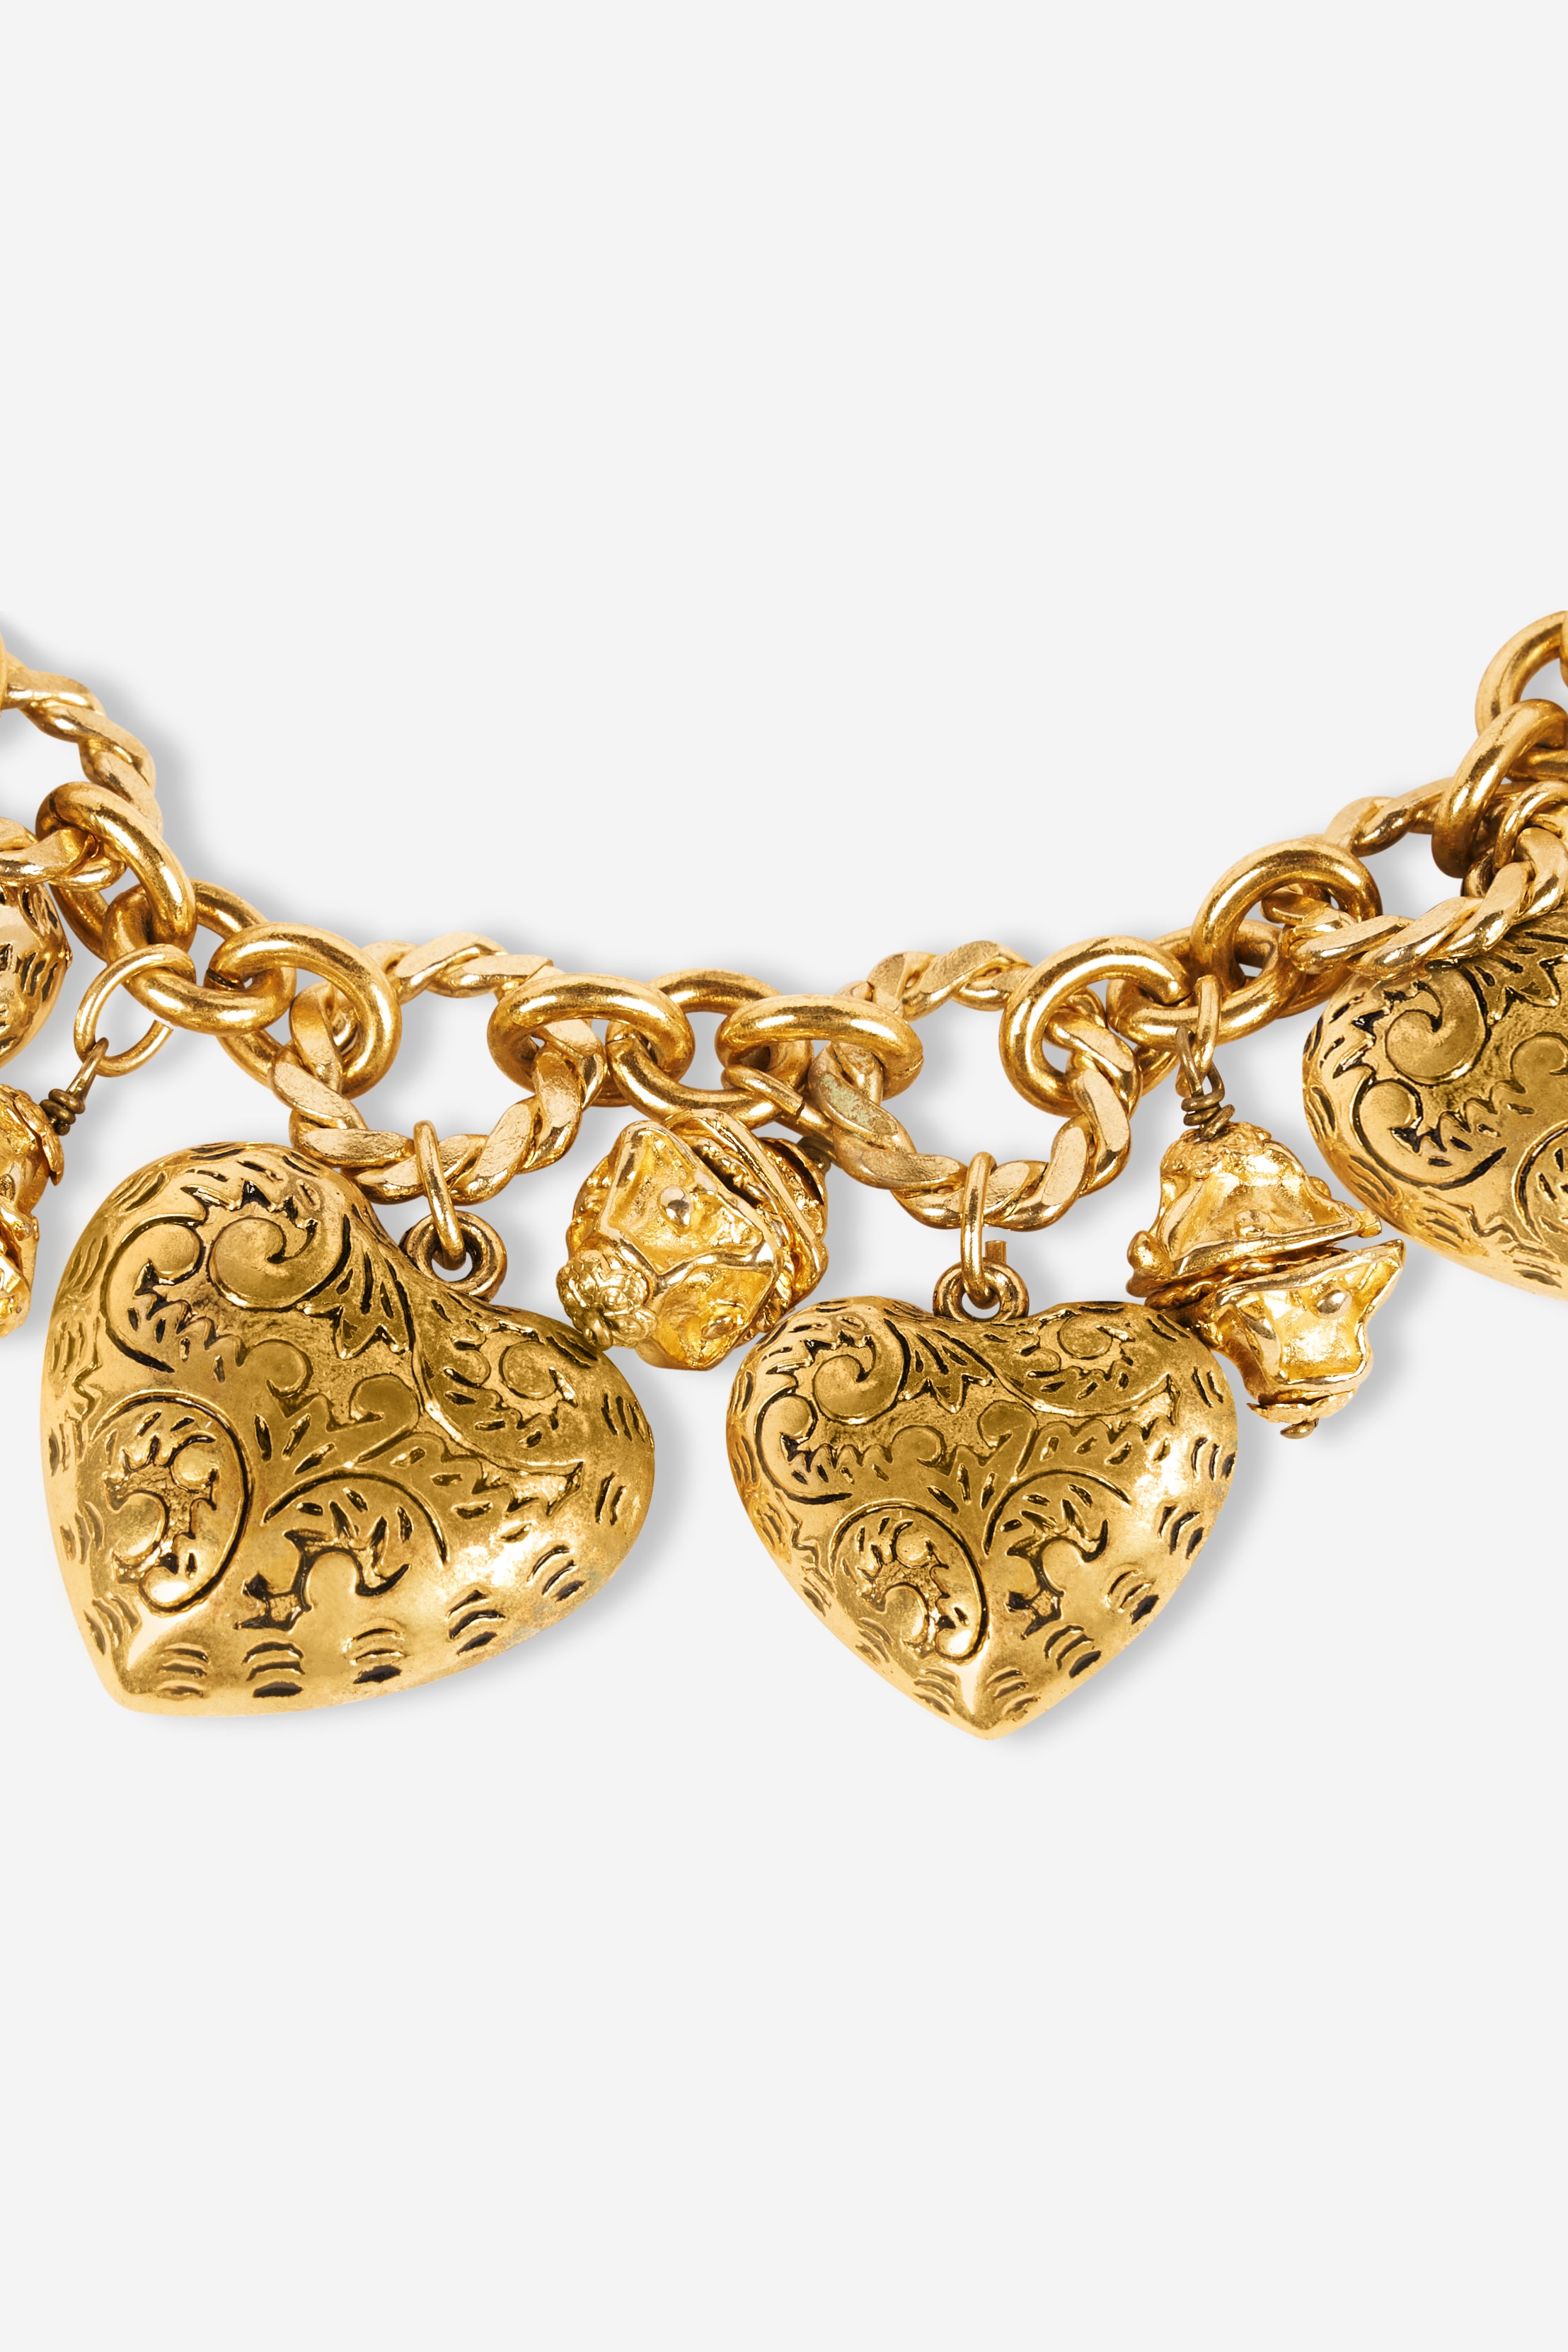 Golden hearts necklace